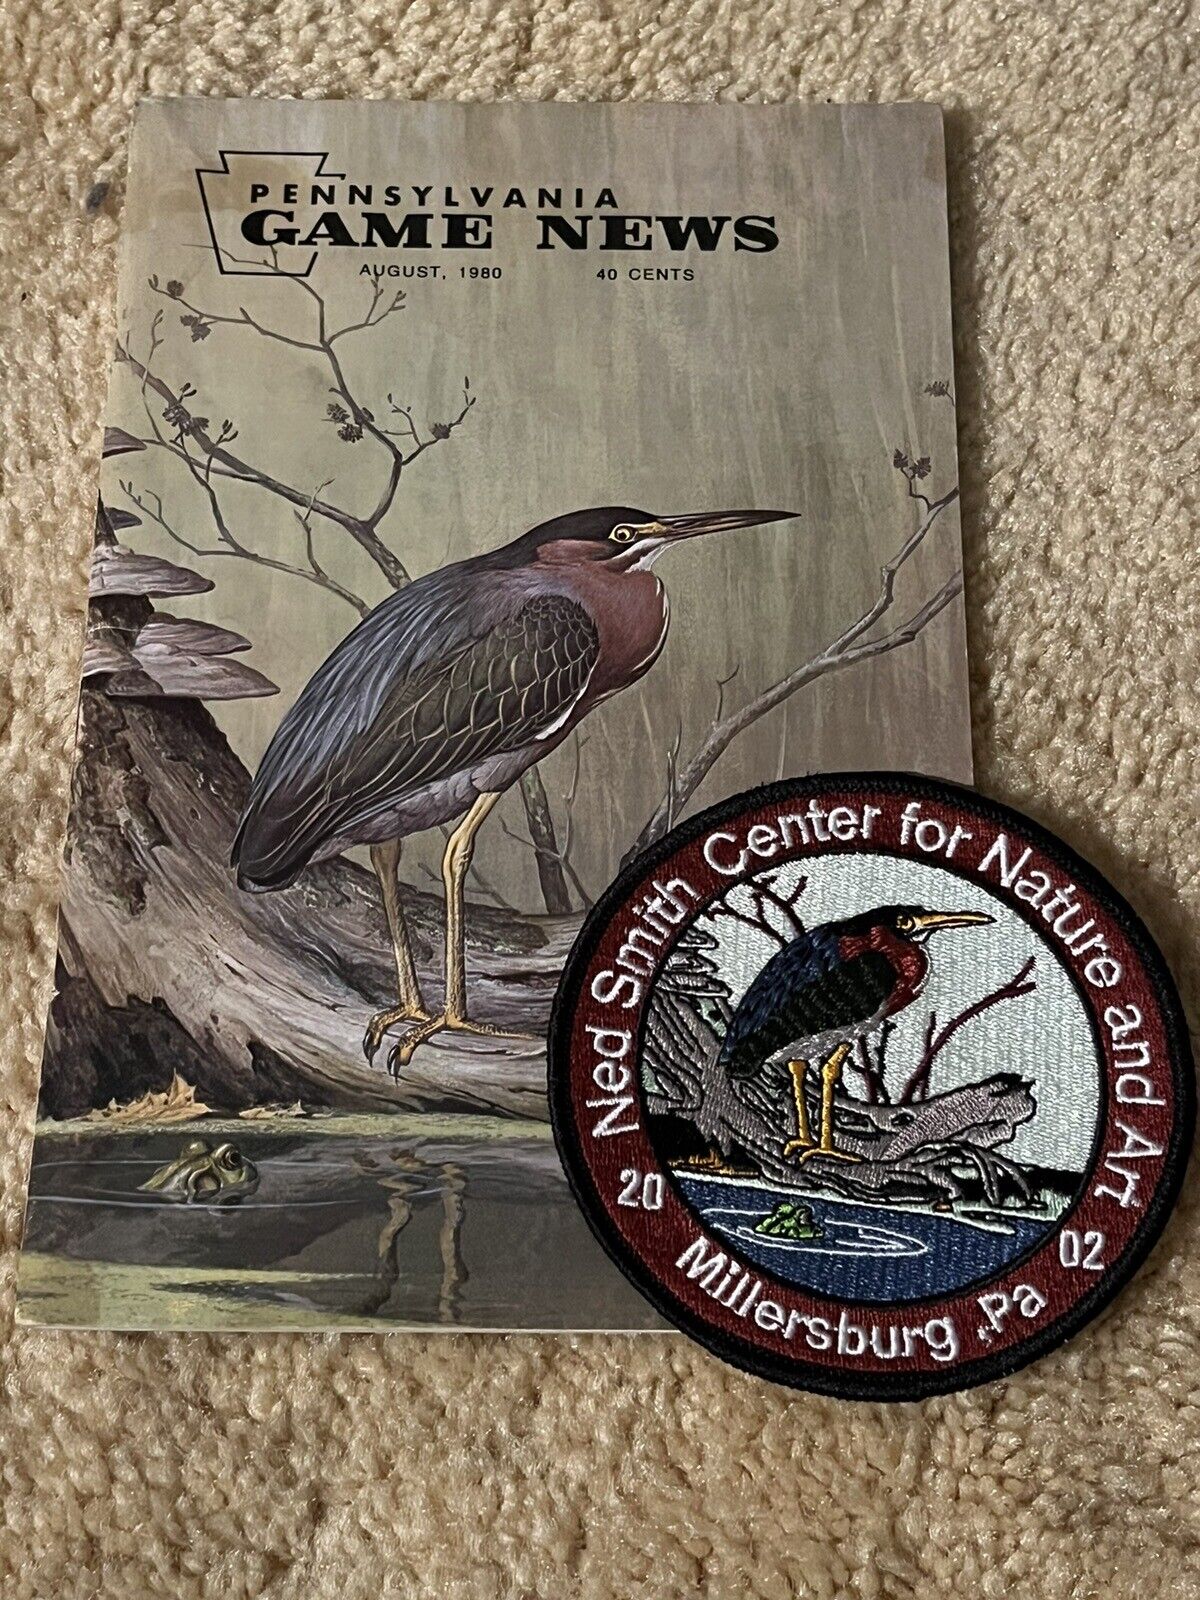 WILDLIFE ARTIST “NED SMITH” PATCH WITH MATCHING PA GAME COMMISSION MAGAZINE